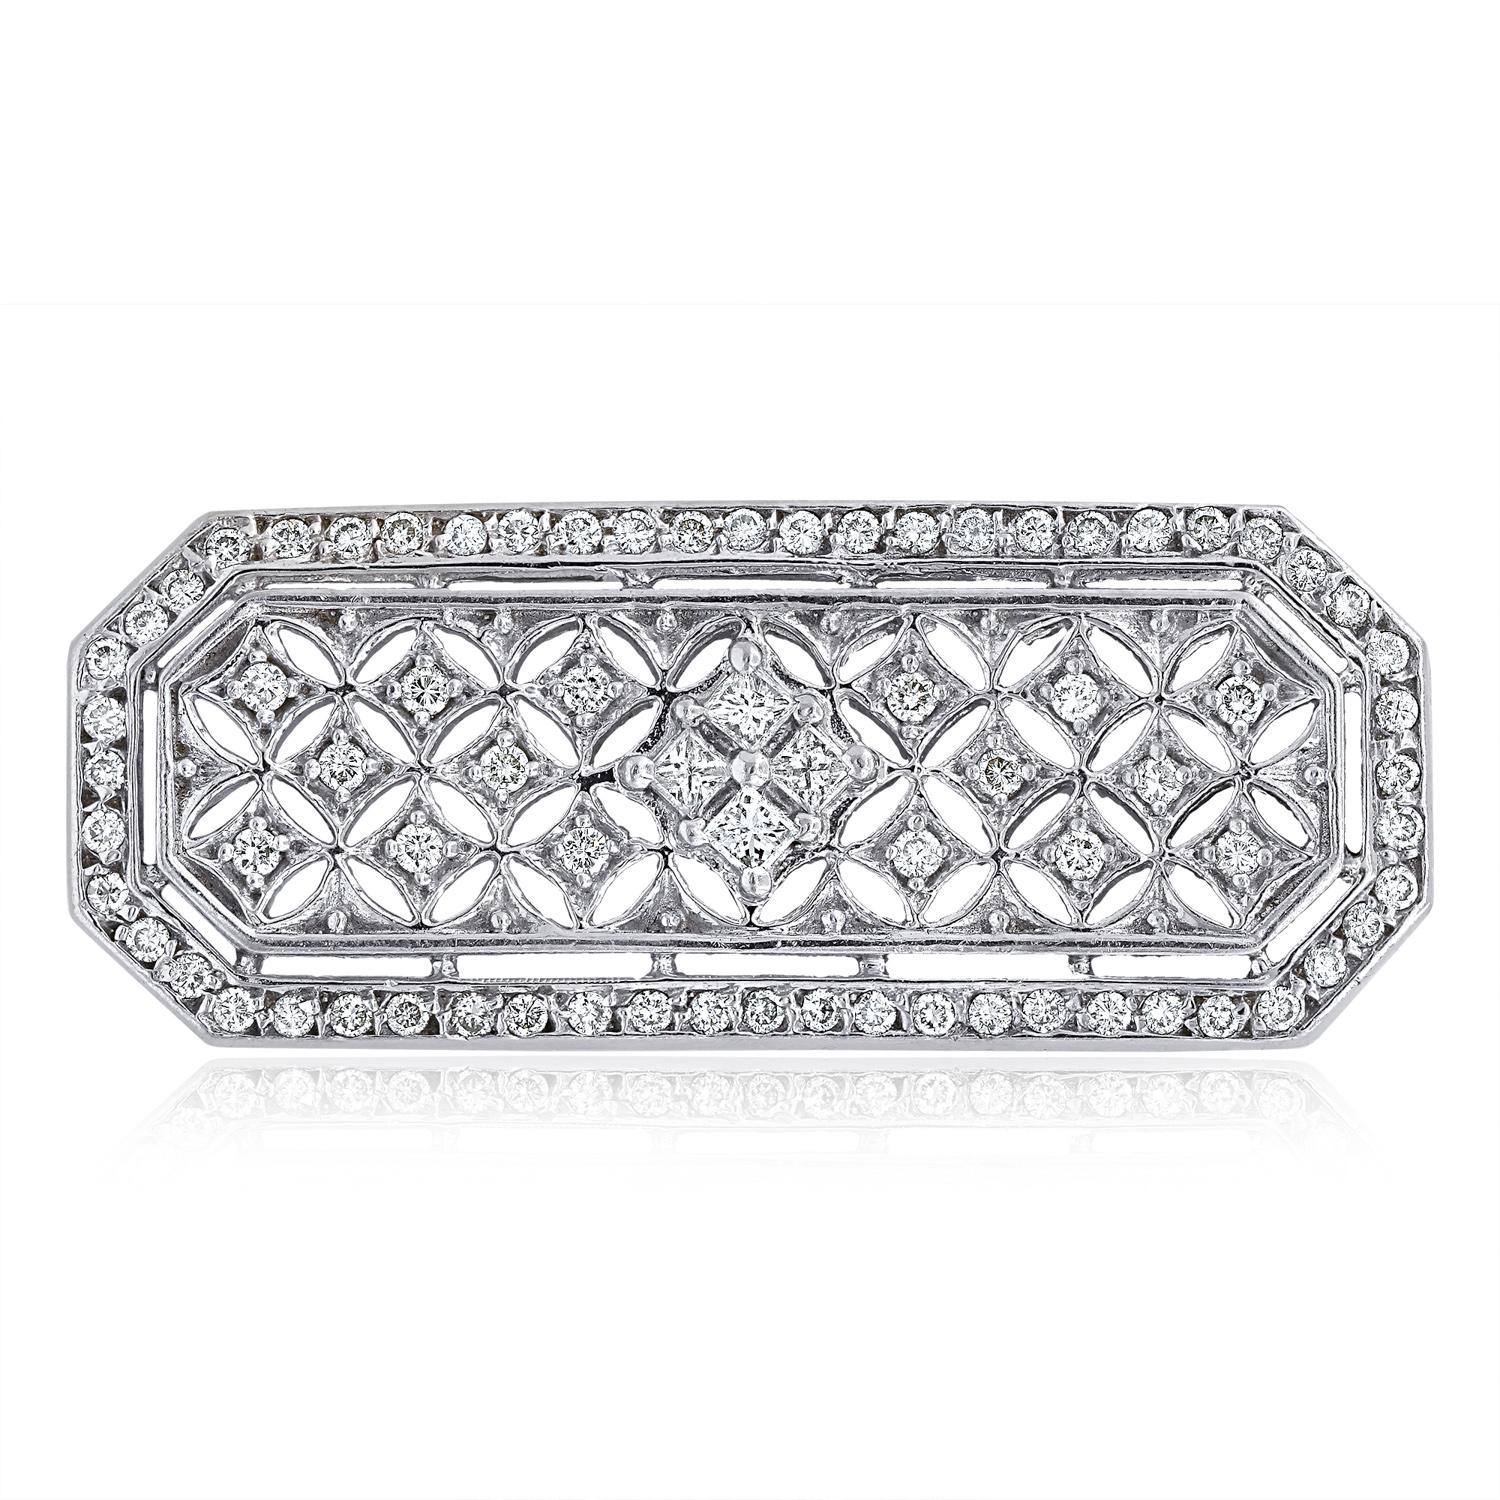 Brilliant Cut Diana M. Openwork 14 kt white gold diamond pin/brooch adorned with 1.60 cts  For Sale